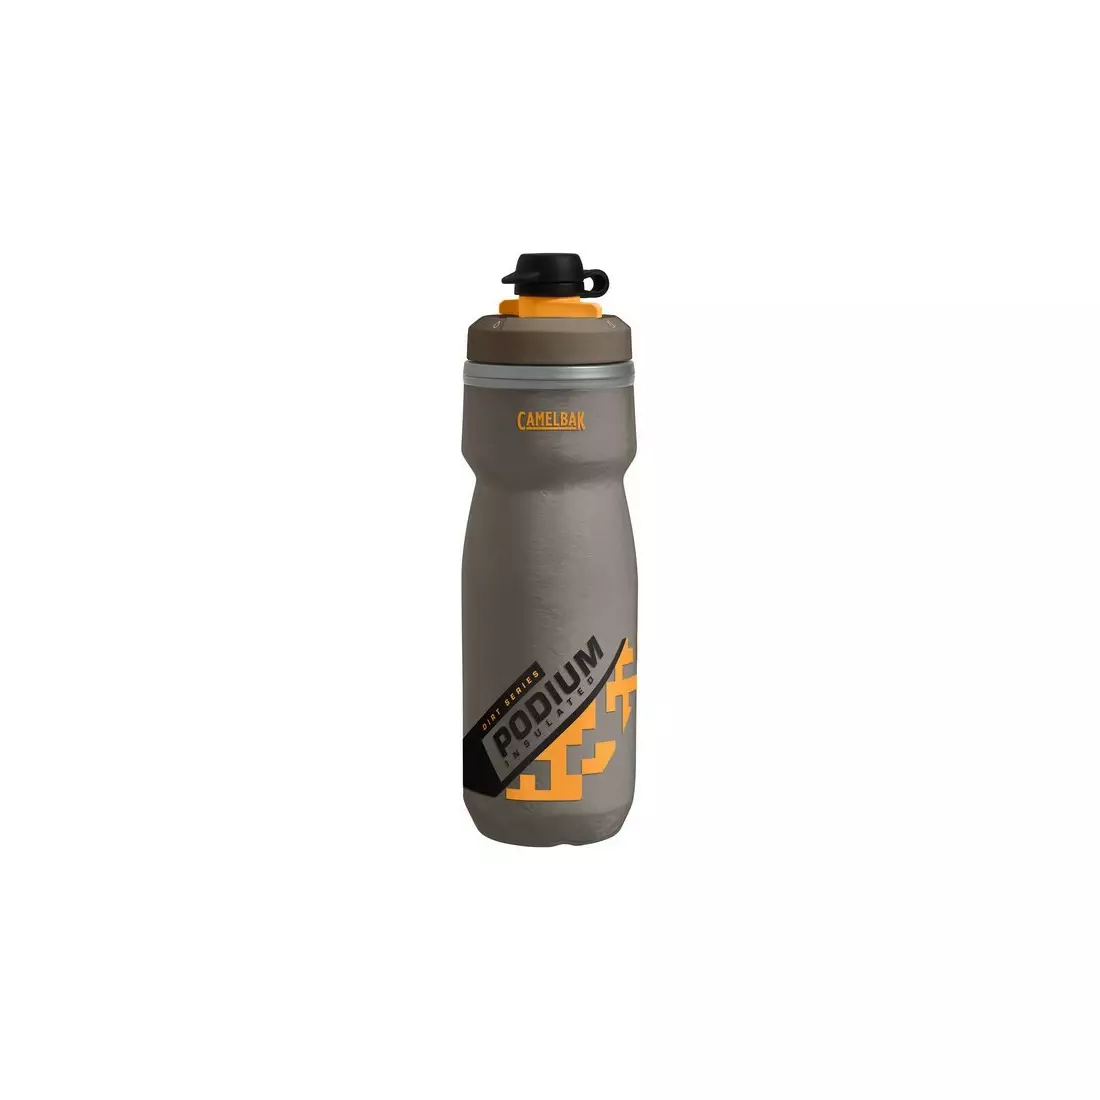 CAMELBAK Thermal bicycle bottle Podium Dirt Series Insulated 620ml c1901/002062/UNI